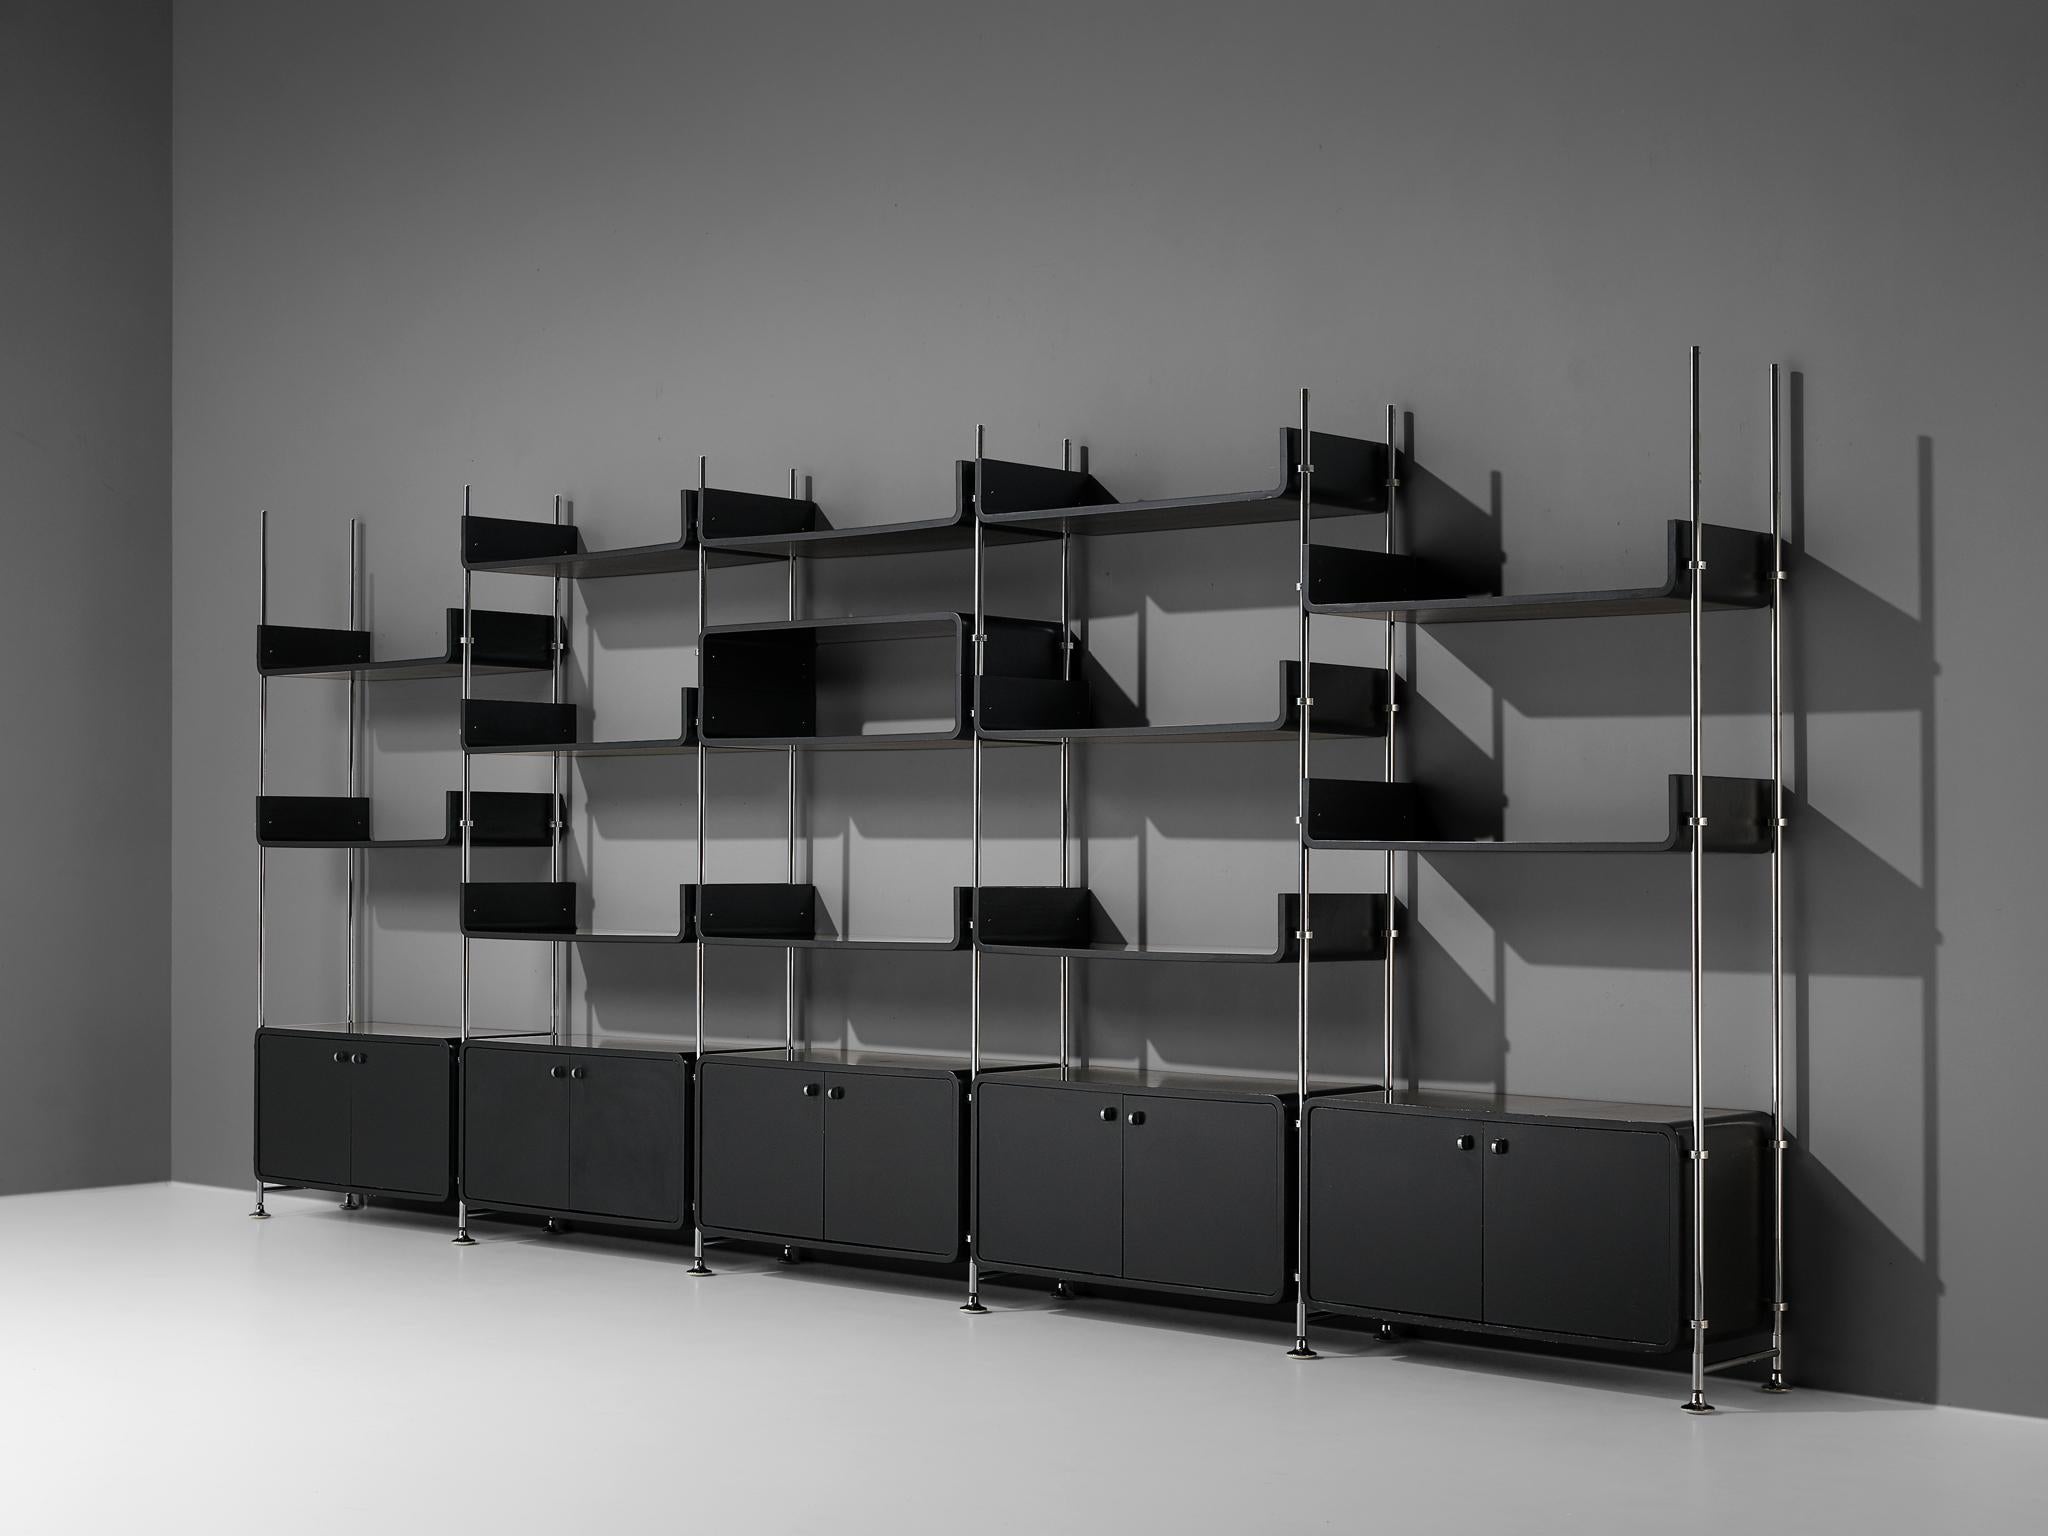 Michael Ducaroy, free-standing wall unit, steel, lacquered wood, France, 1970s

Michael Ducaroy designed this free-standing wall unit in the 1970s. In five columns are five closed cabinet and multiple shelves to find. The black lacquered wood is